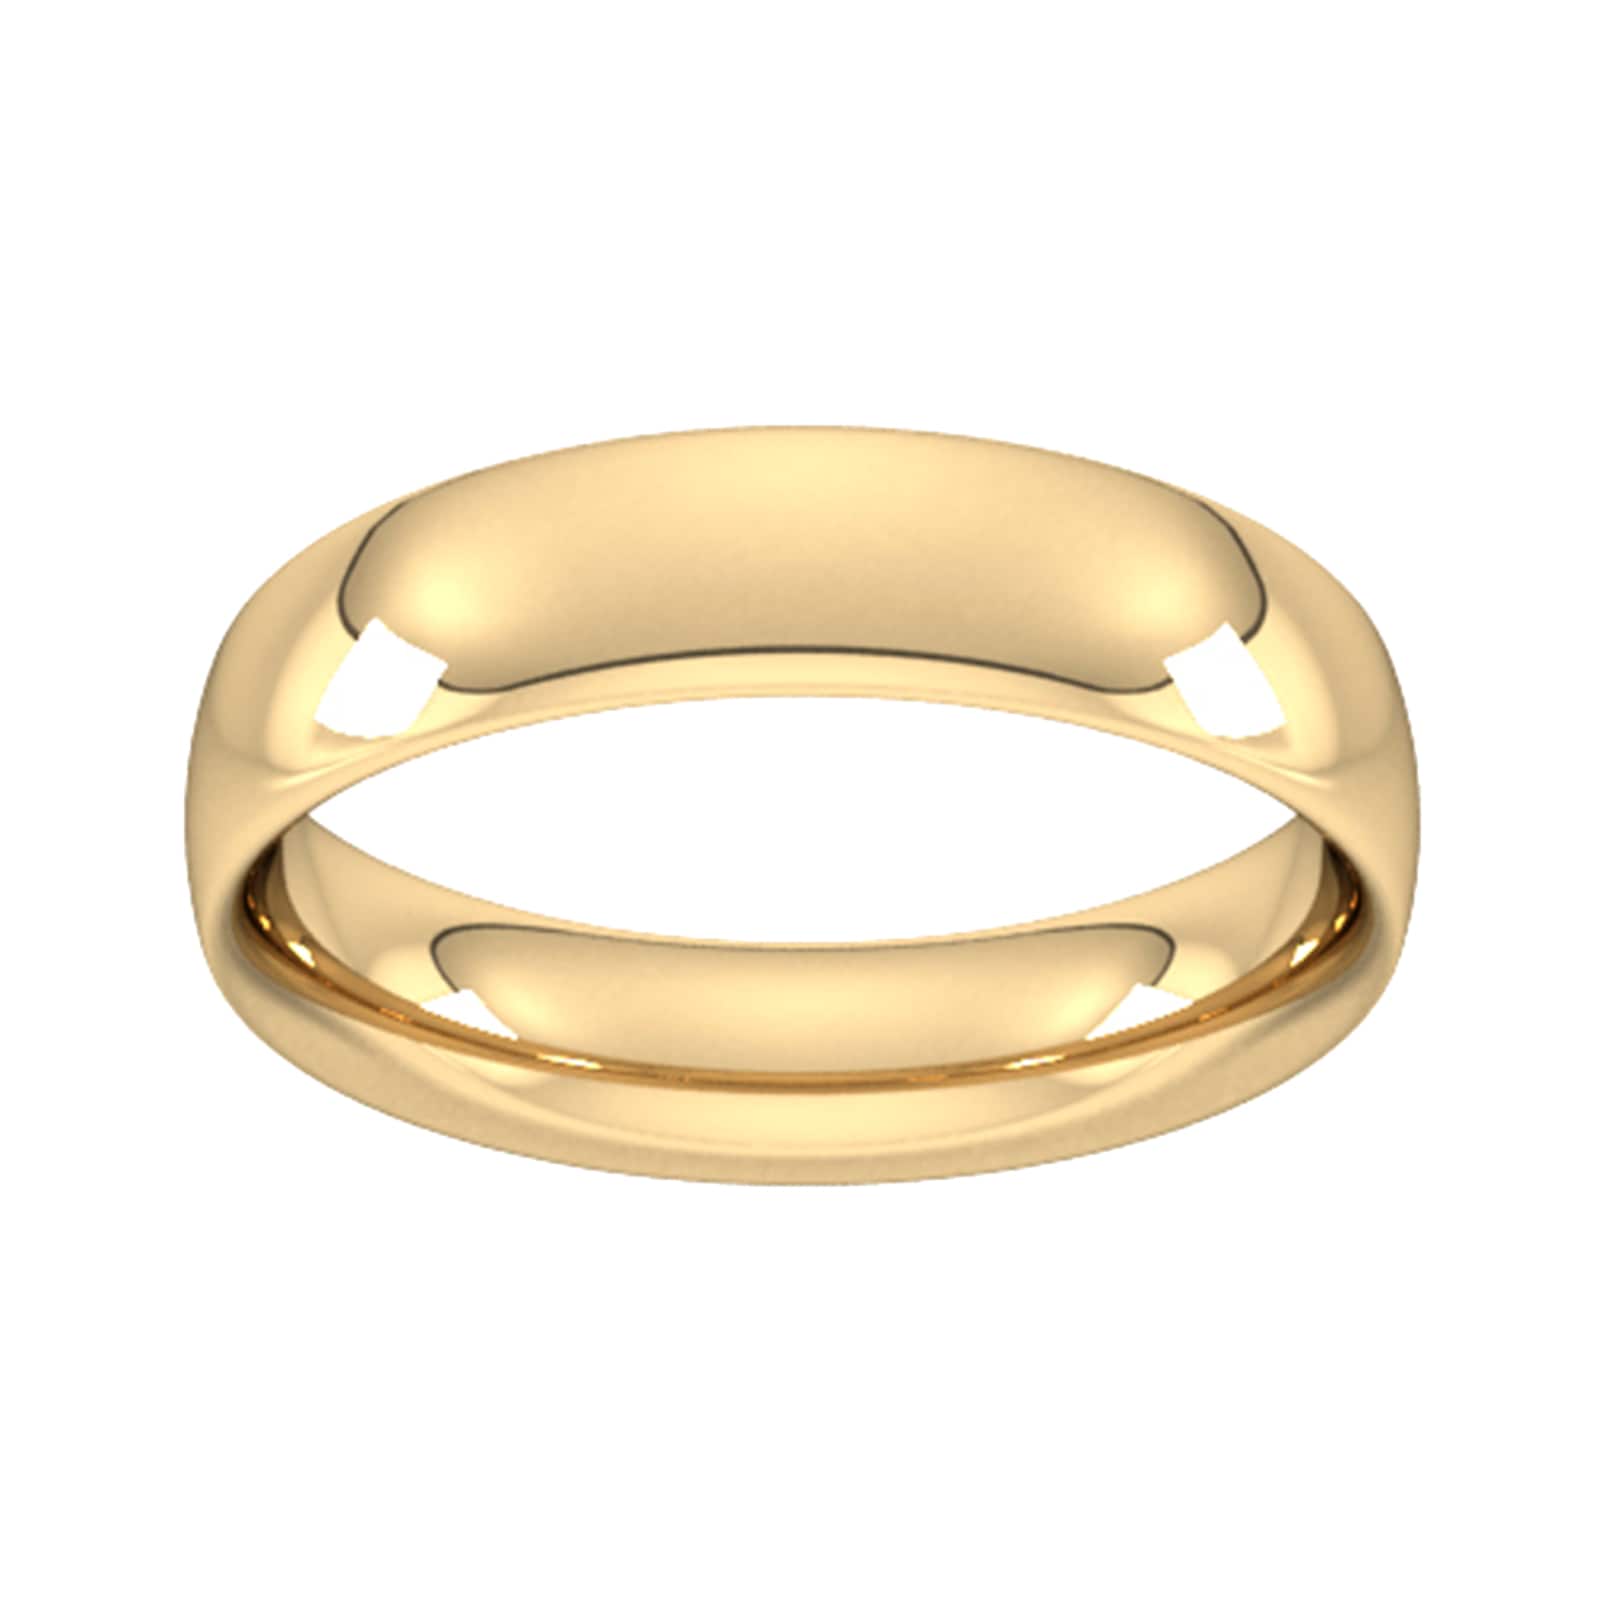 5mm Traditional Court Heavy Wedding Ring In 9 Carat Yellow Gold - Ring Size X